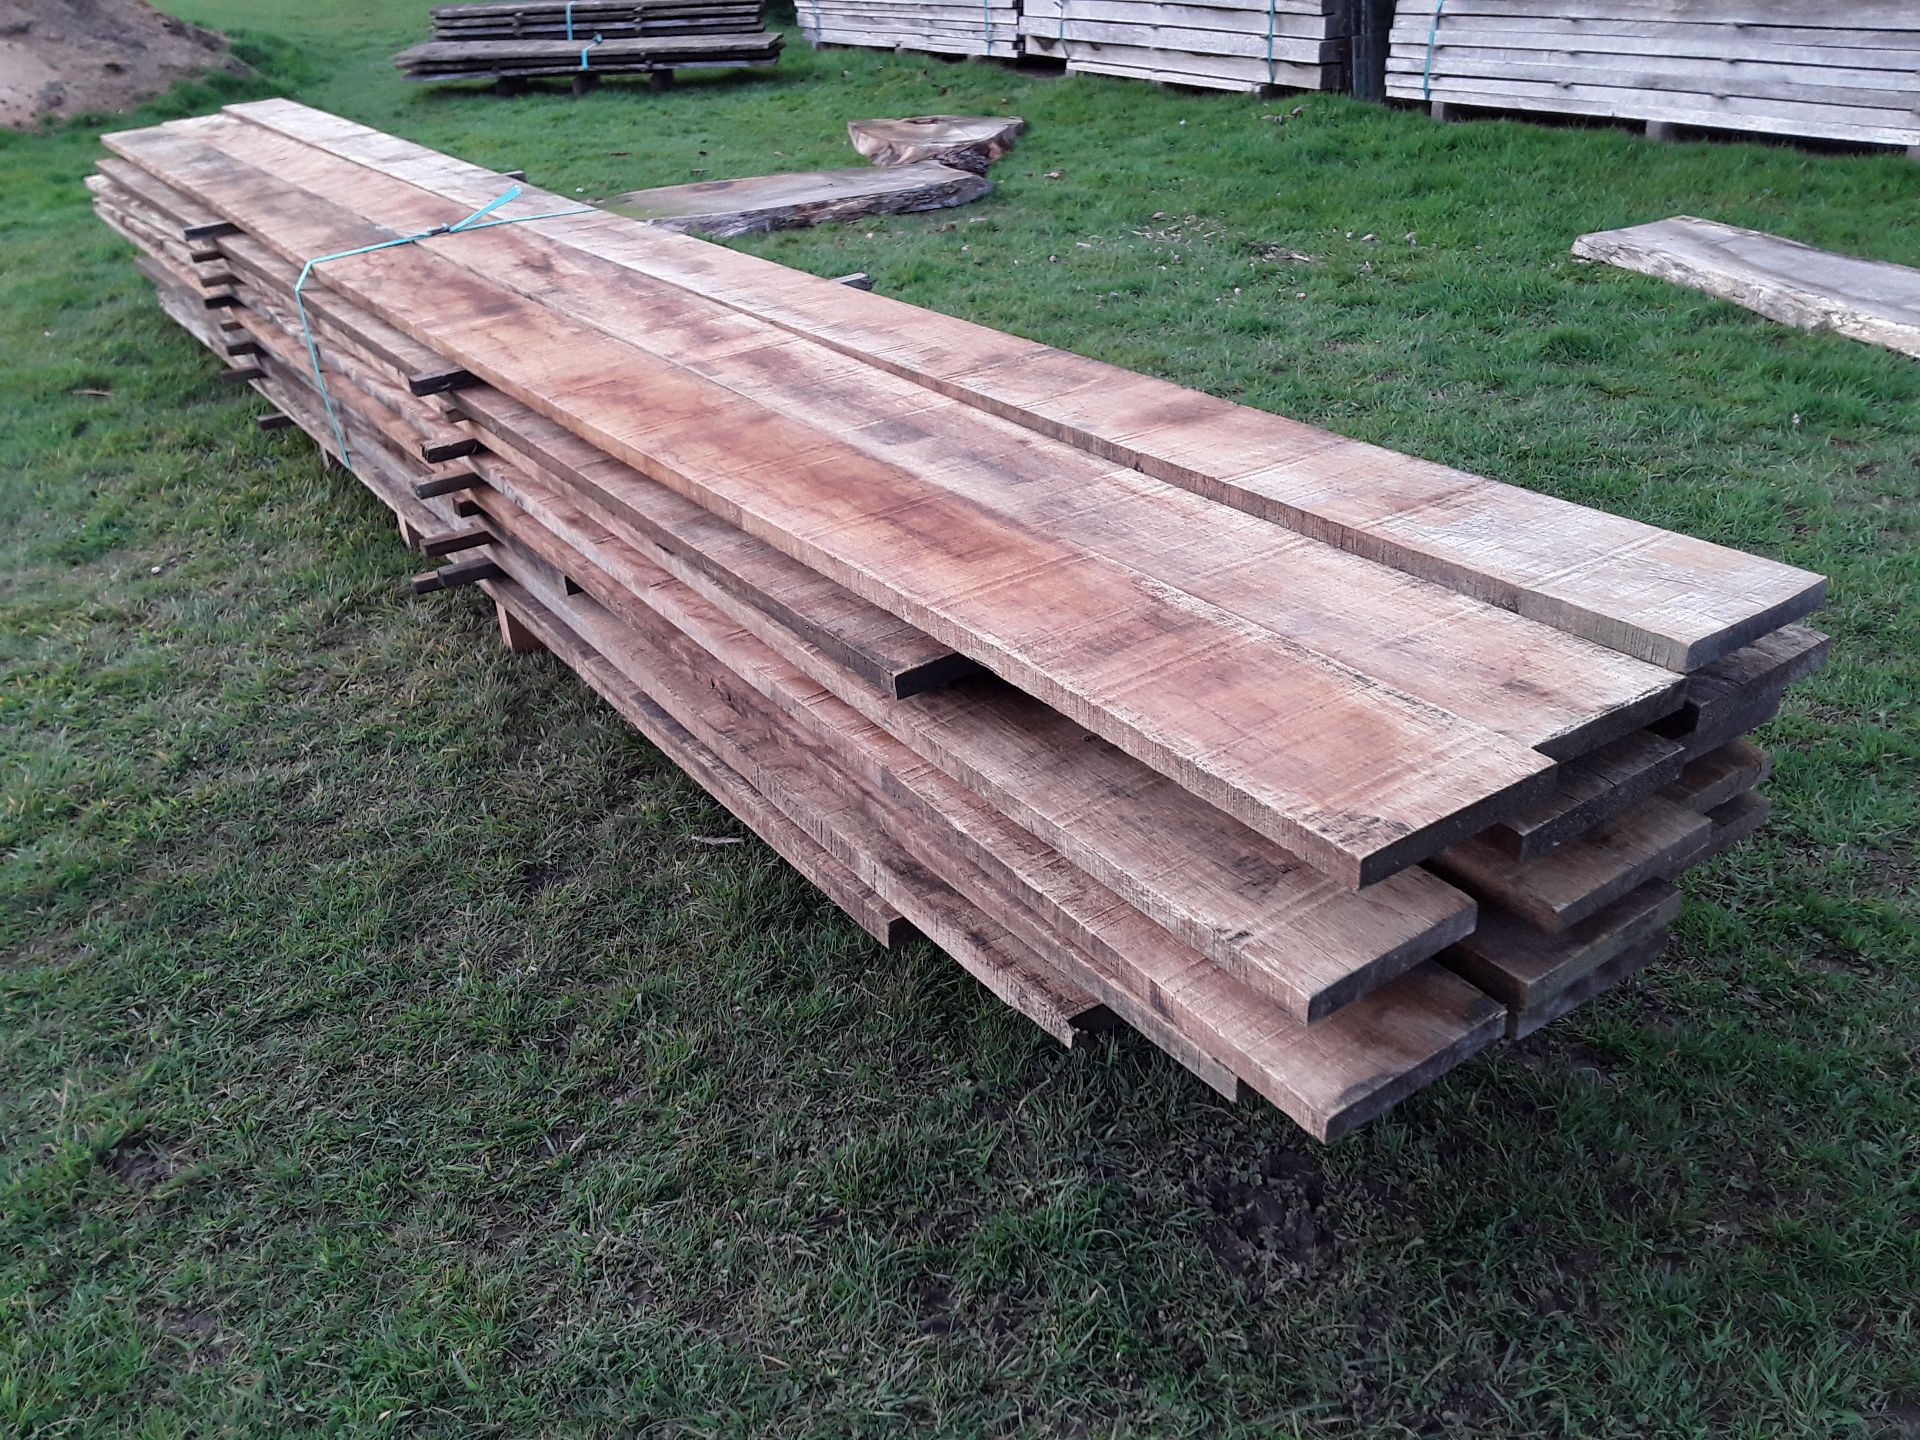 24 x Hardwood Air Dried Timber African Opepe Boards / Planks - Image 2 of 10